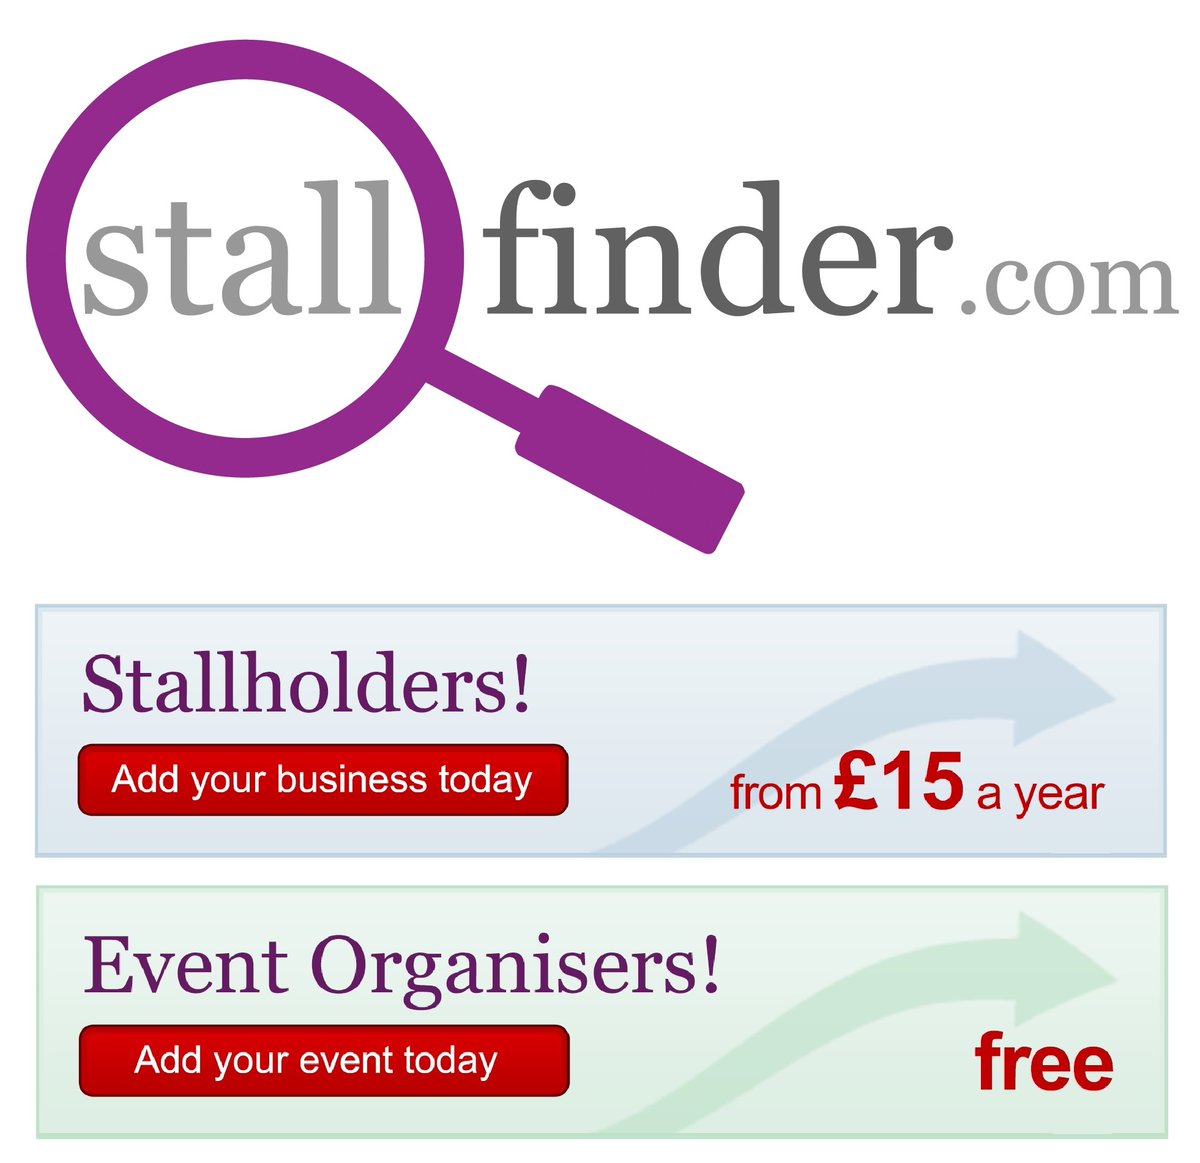 Stallfinder lists UK events & stallholders including handmade crafts, gifts, entertainment & mobile catering. It's free to add events & stallholder business listings start from just £15 a year stallfinder.com #stallfinder #MHHSBD #uksmallbusiness #indiebiz